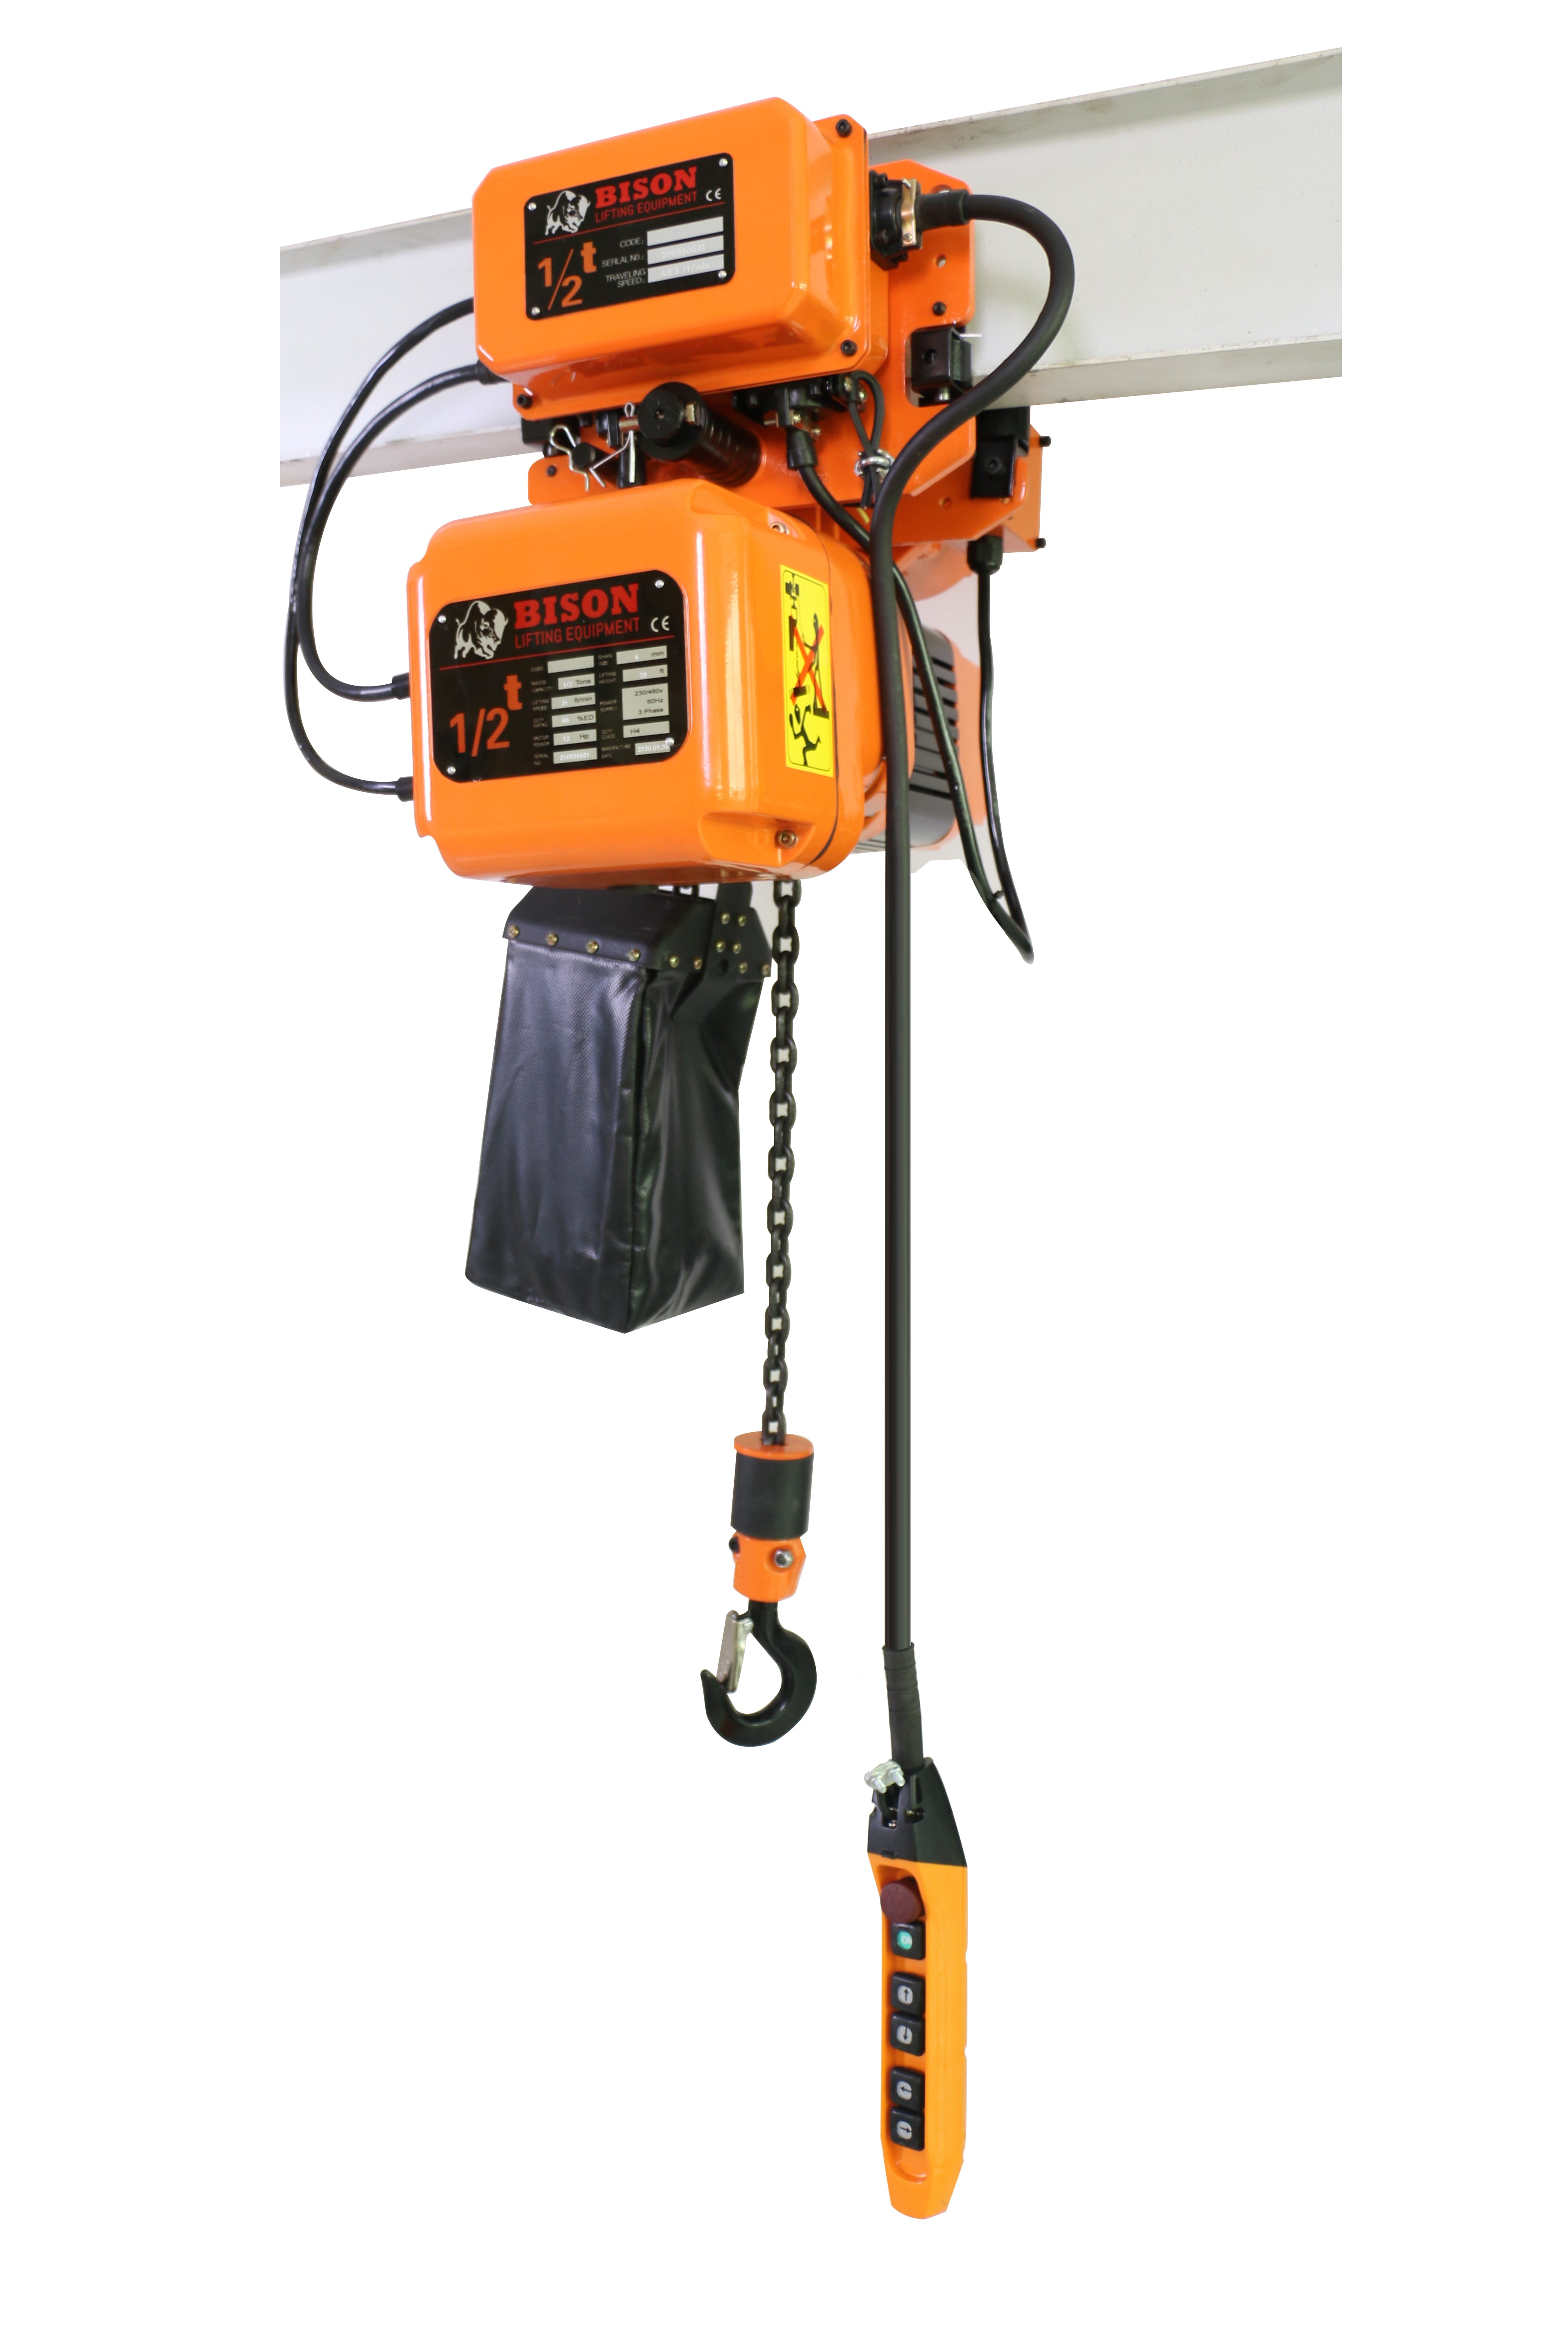 Bison 0.5Ton Three Phase Dual Speed Electric Chain Hoist with Trolley 230v/460v